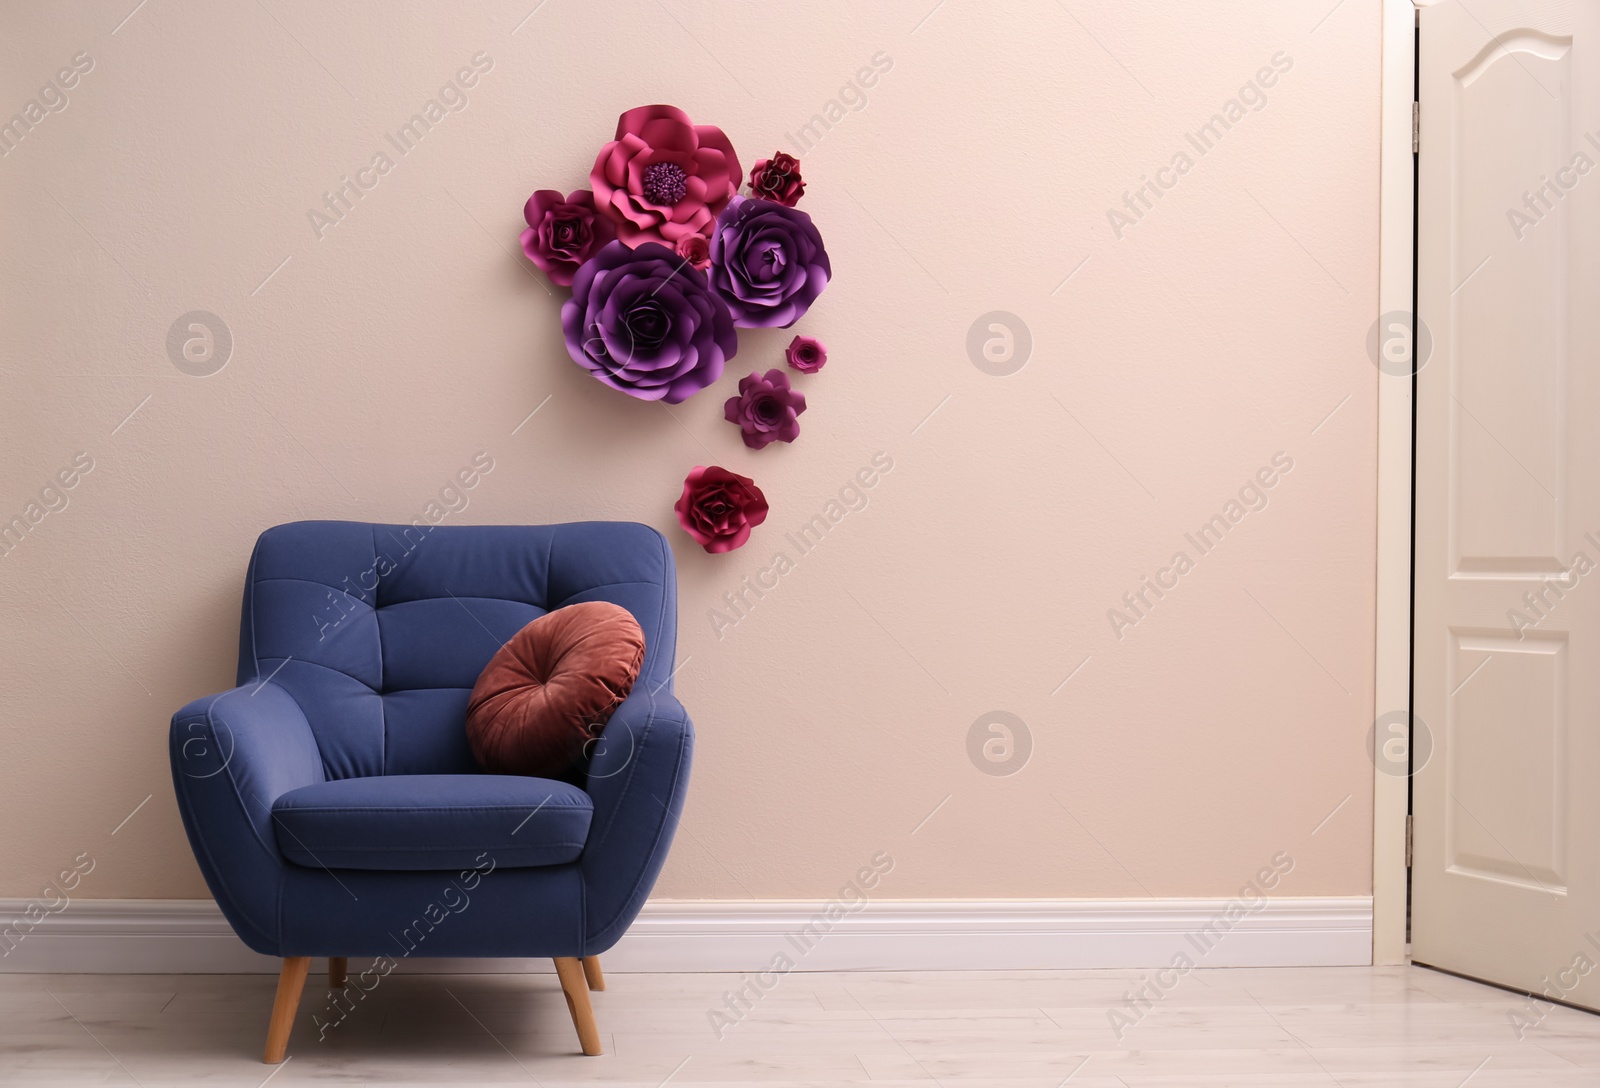 Photo of Comfortable armchair near wall with floral decor in room, space for text. Interior design